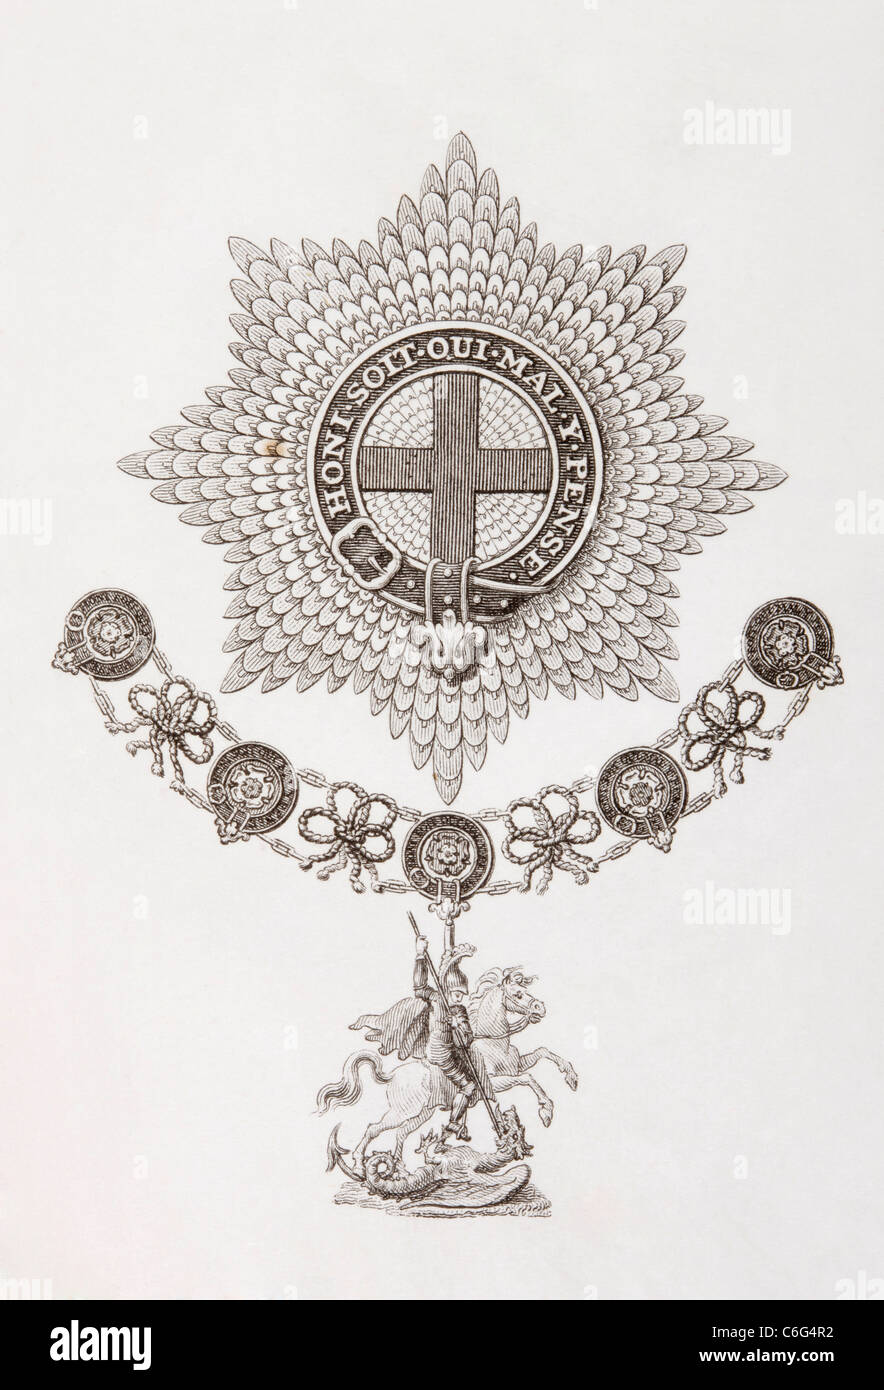 Star, Collar and Badge of the Order of the Garter. Stock Photo